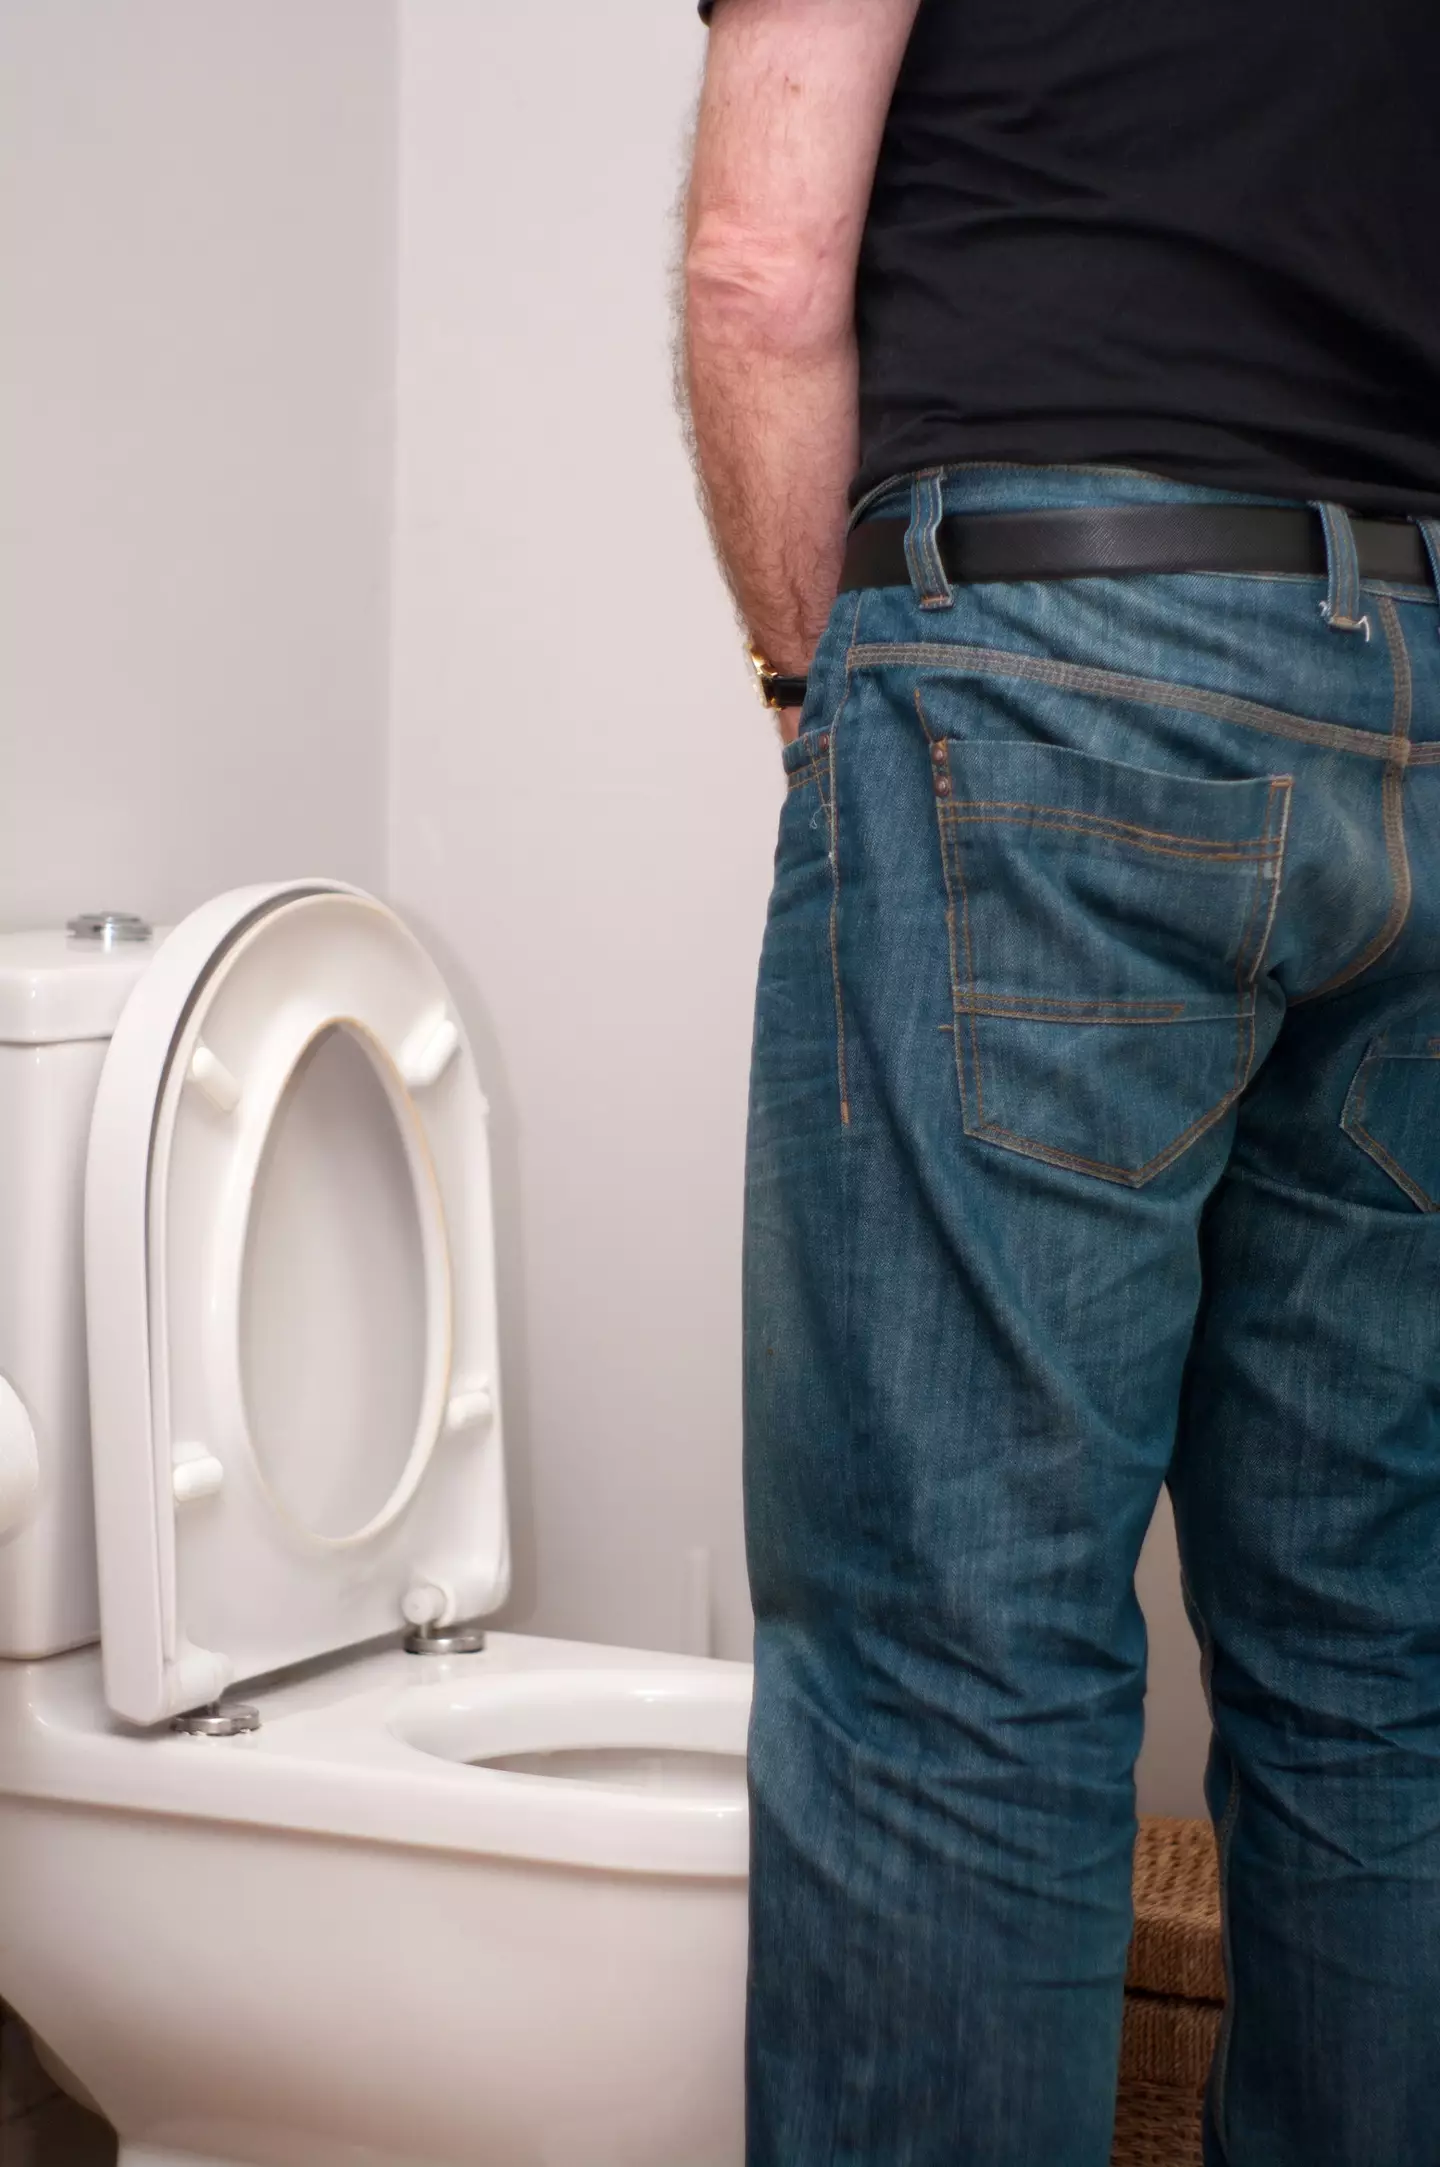 It's time to ditch the habit of the 'just in case' pee.